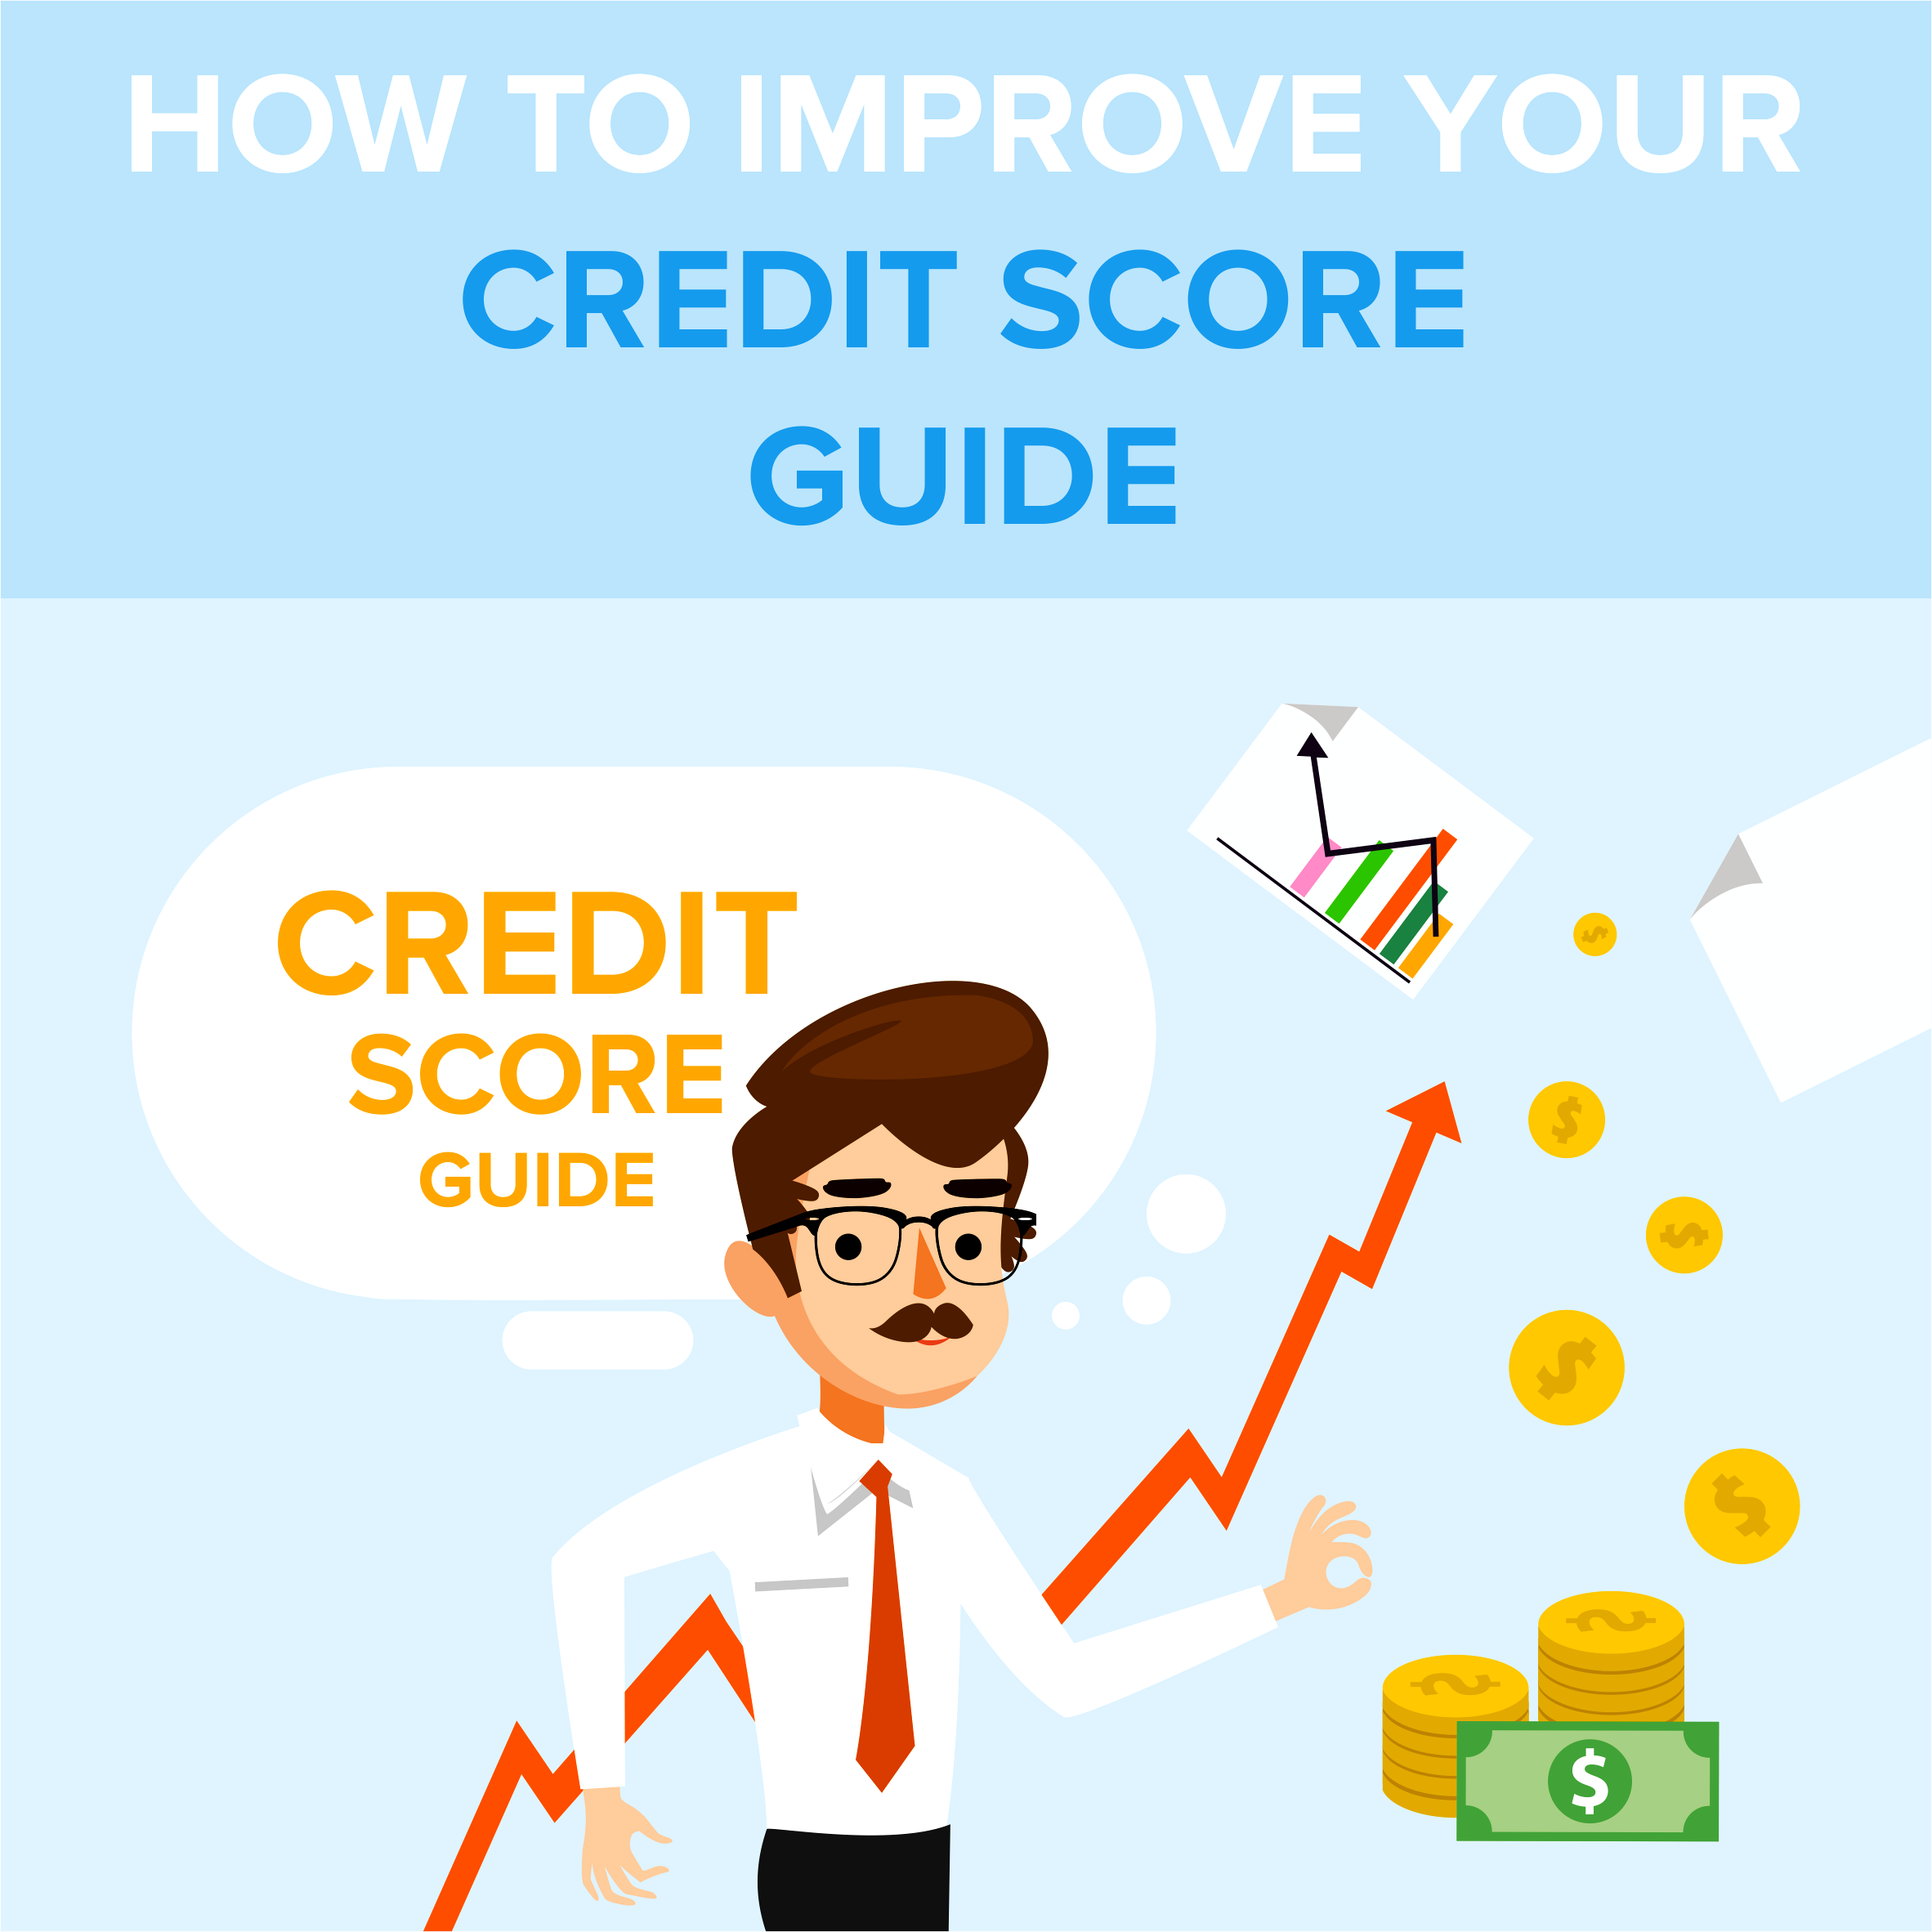 How to Improve Your Credit Score Guide